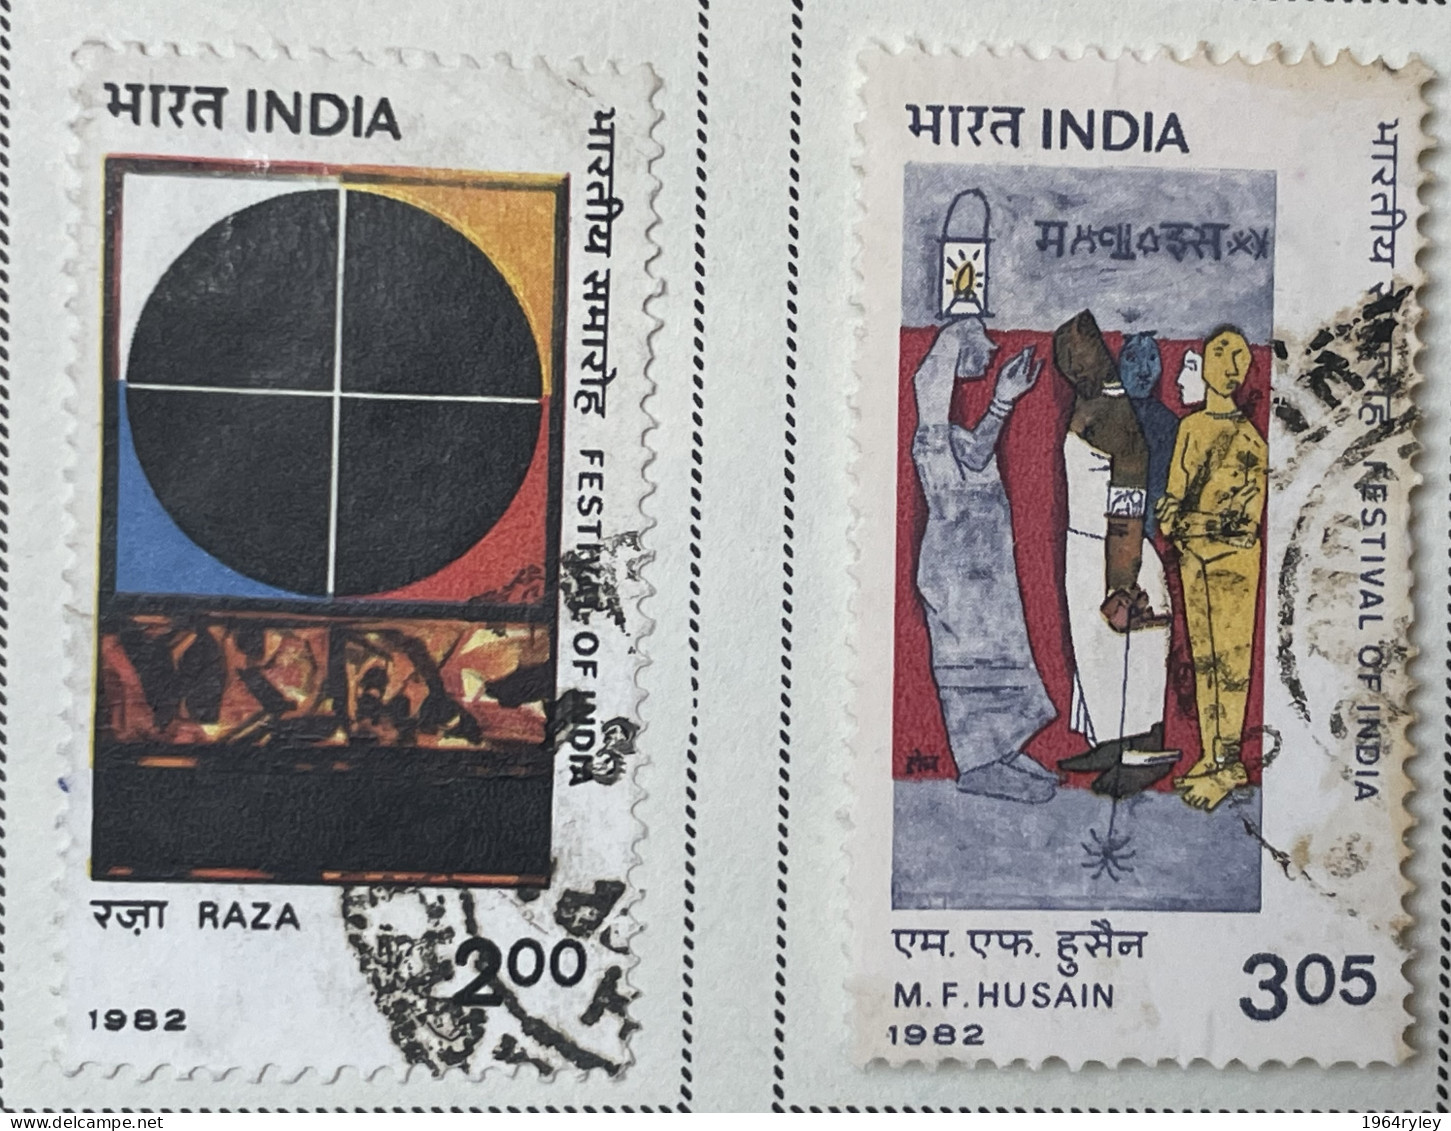 INDIA - (0) - 1982  #  986/987     SEE PHOTO FOR CONDITION OF STAMP(S) - Gebruikt